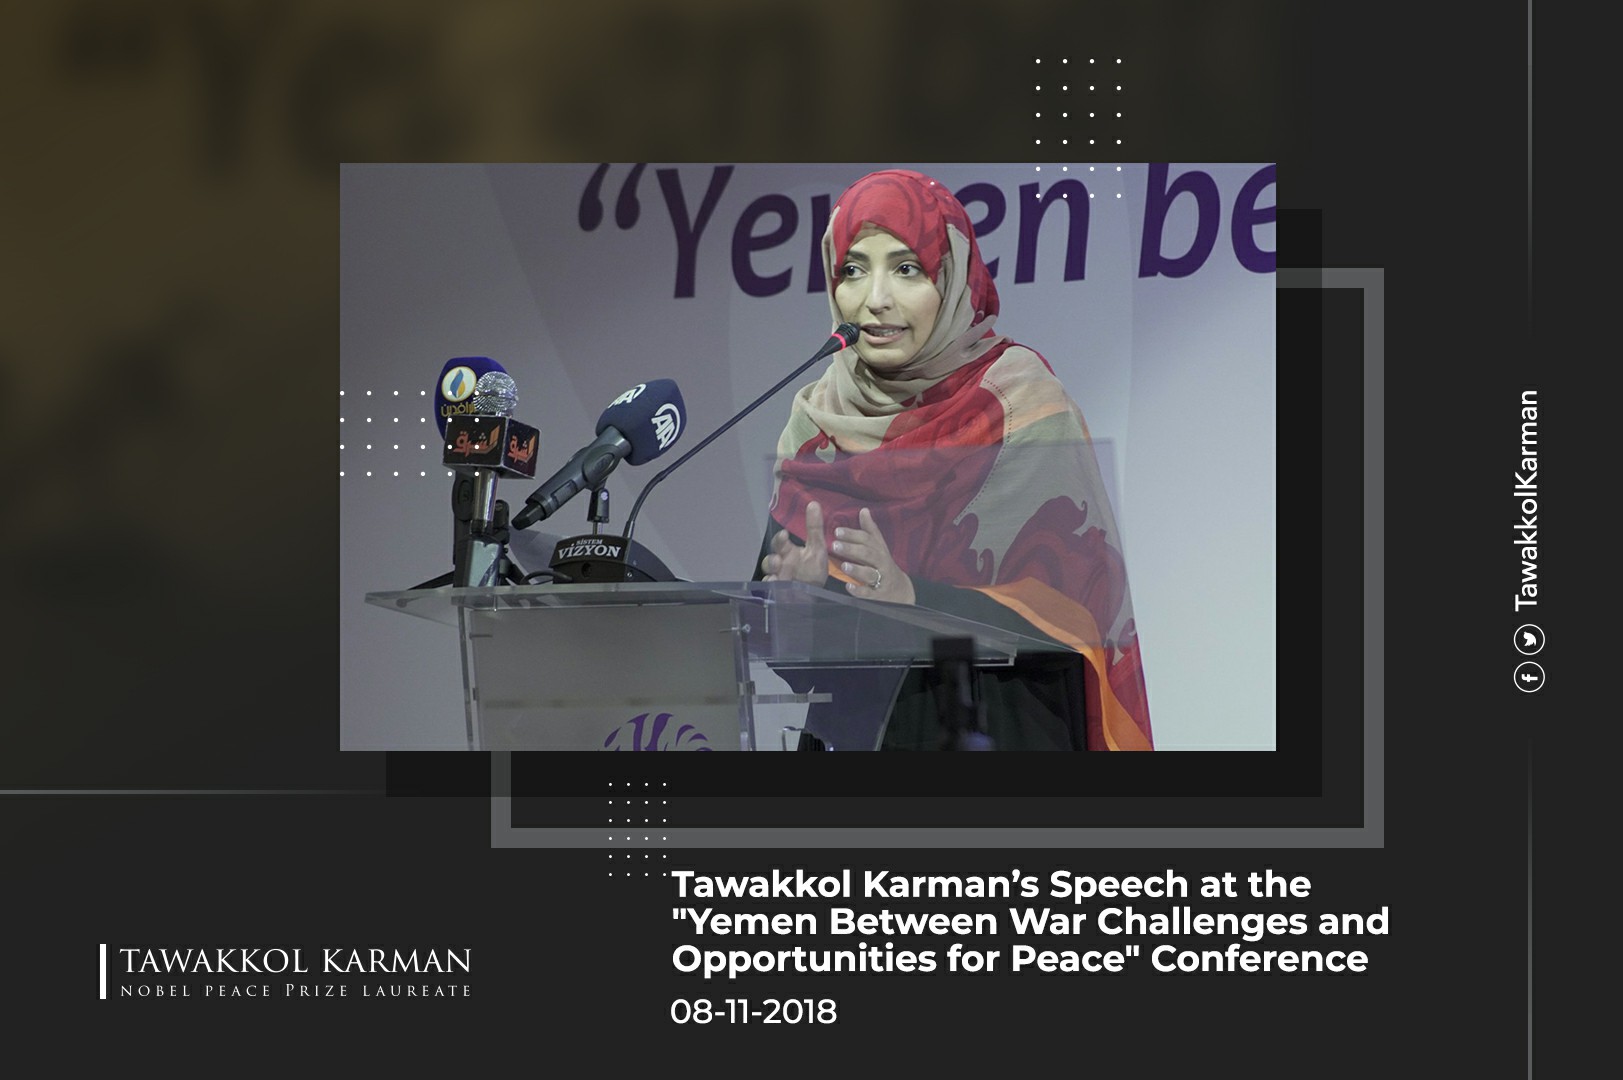 Tawakkol Karman’s Speech at the "Yemen Between War Challenges and Opportunities for Peace" Conference